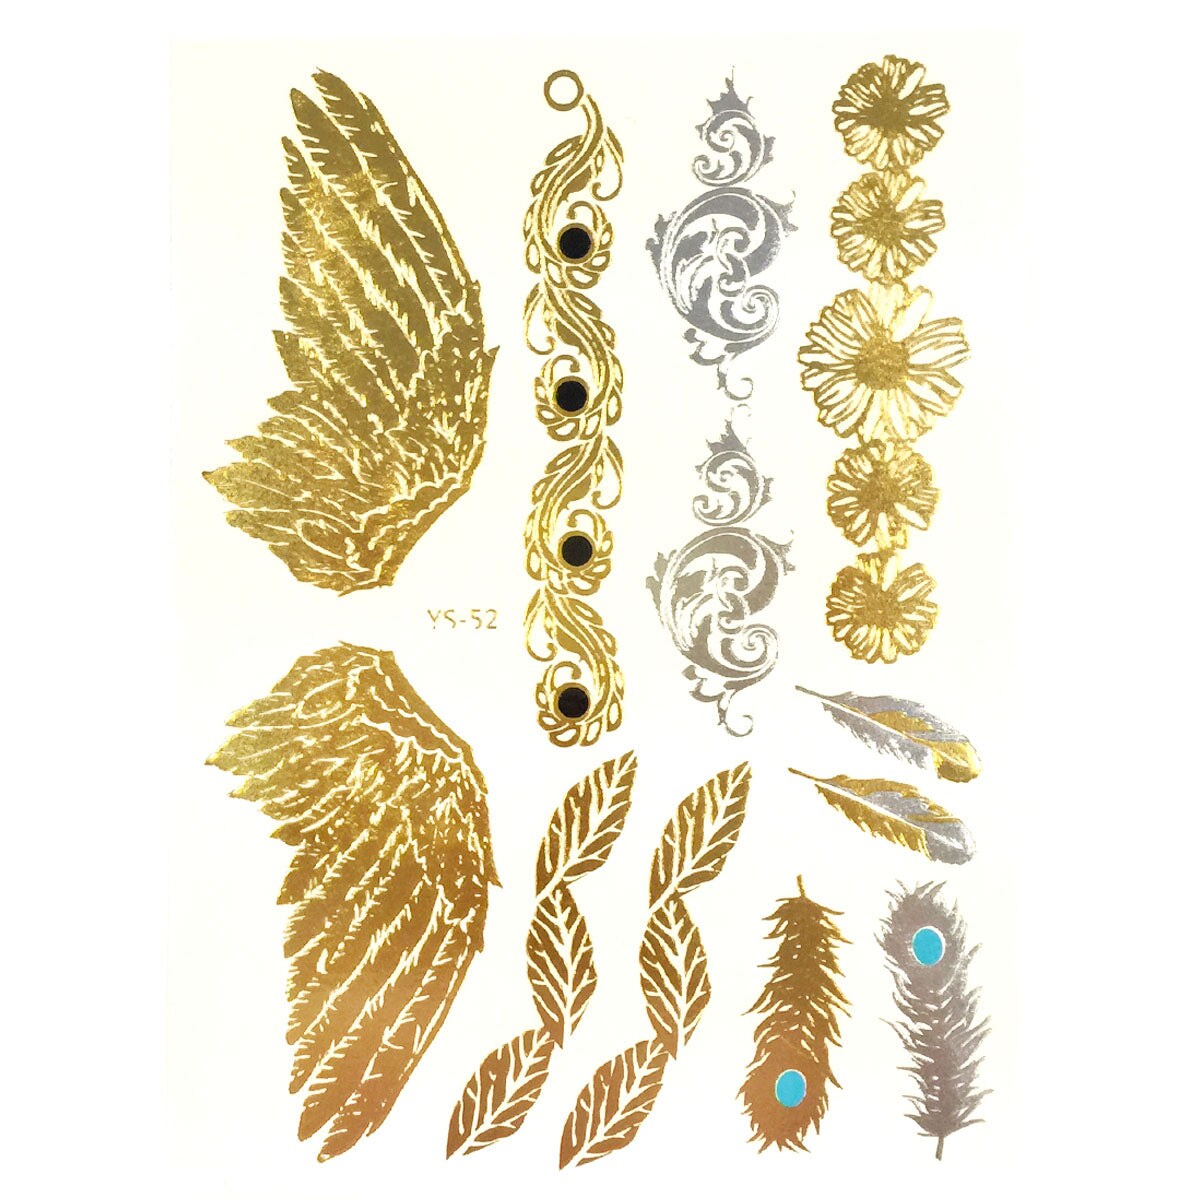 Wrapables Large Metallic Gold and Silver Temporary Tattoo Stickers, Grace